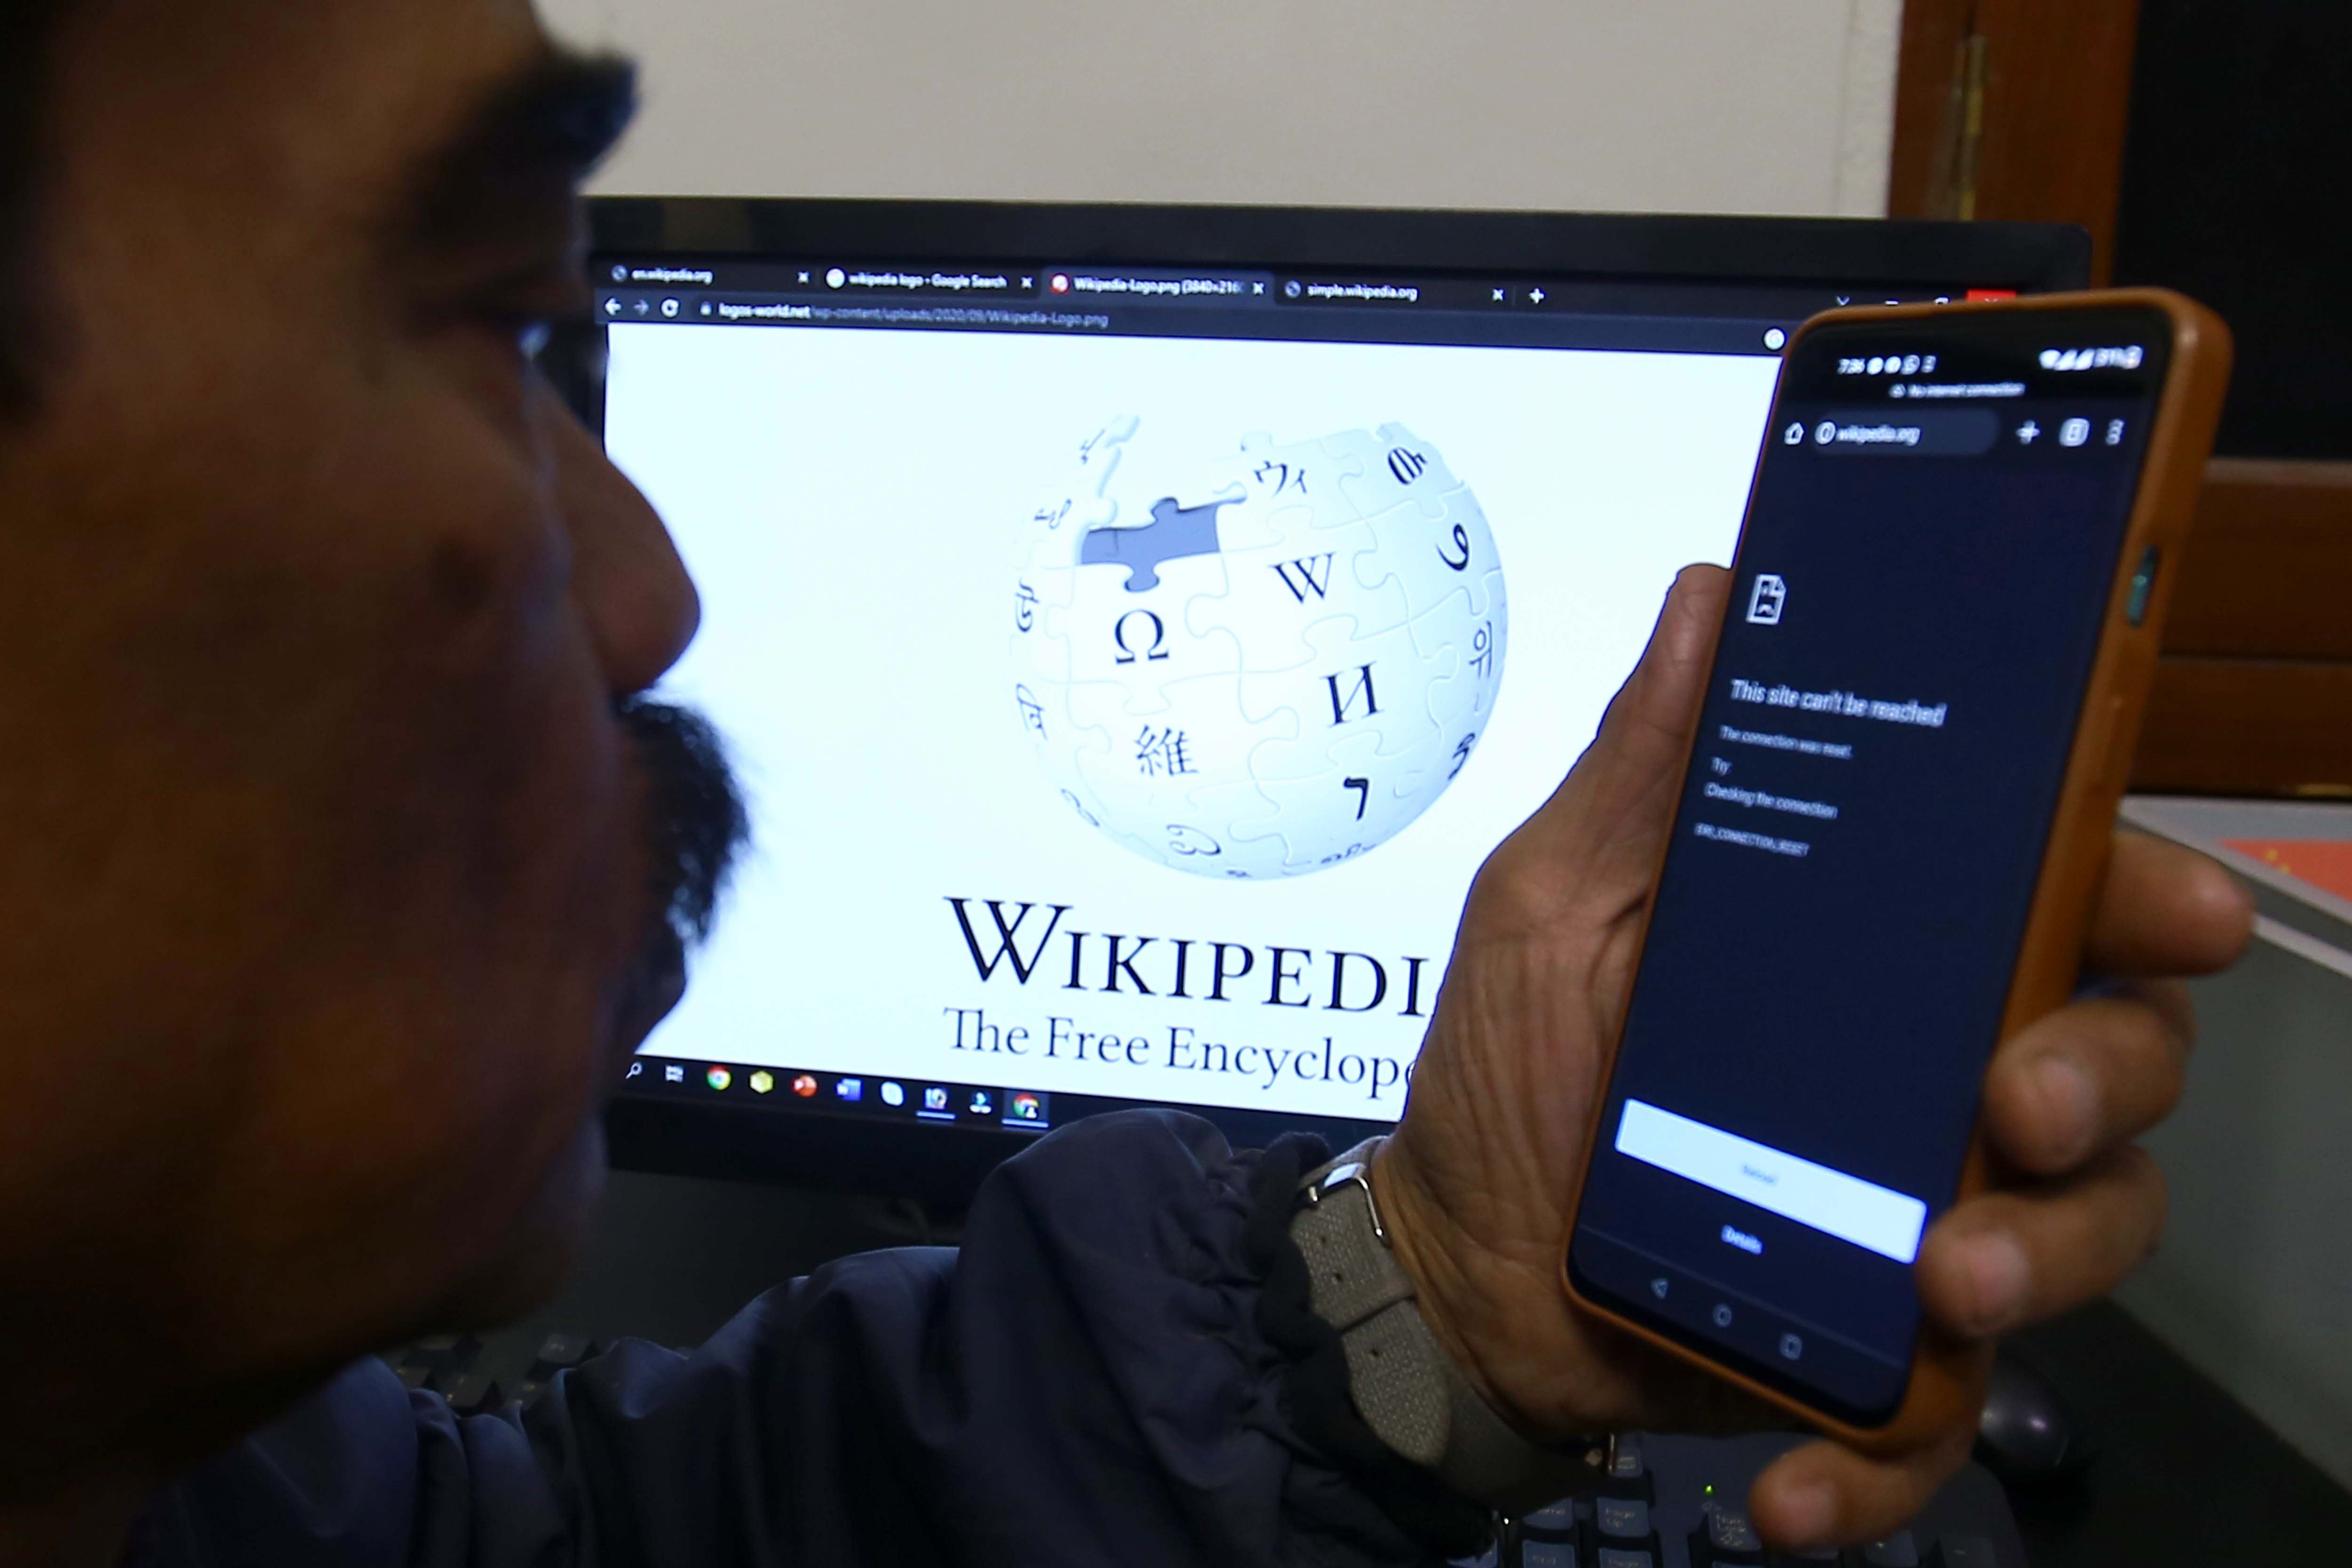 A man in an internet cafe in Karachi can’t access the encyclopaedia on his mobile